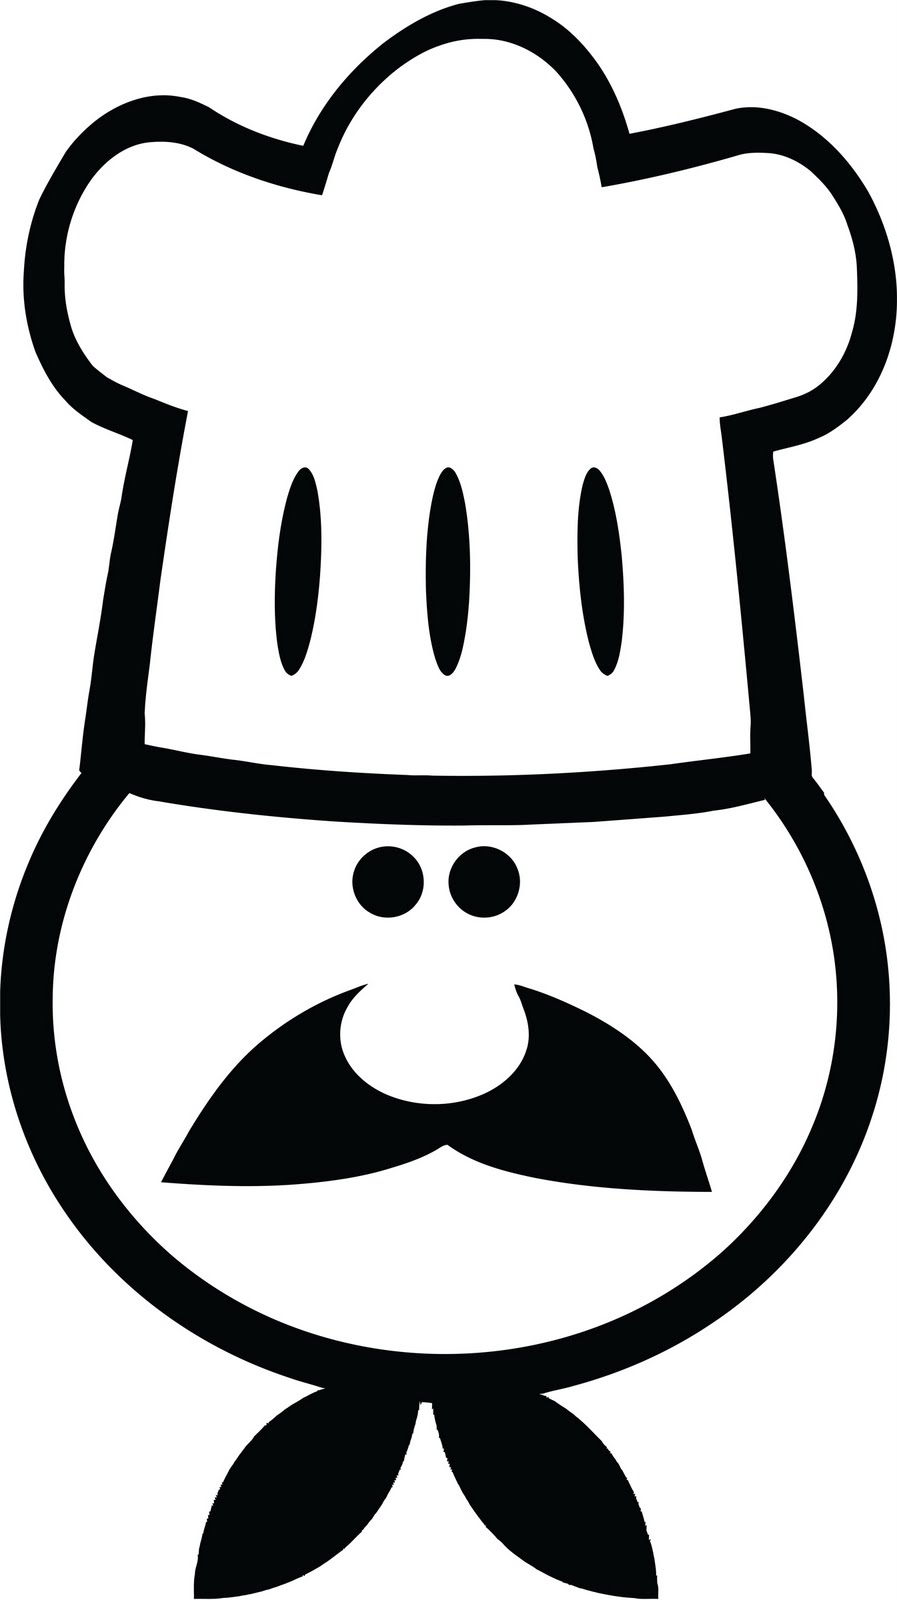 free clipart images chef hat - photo #26